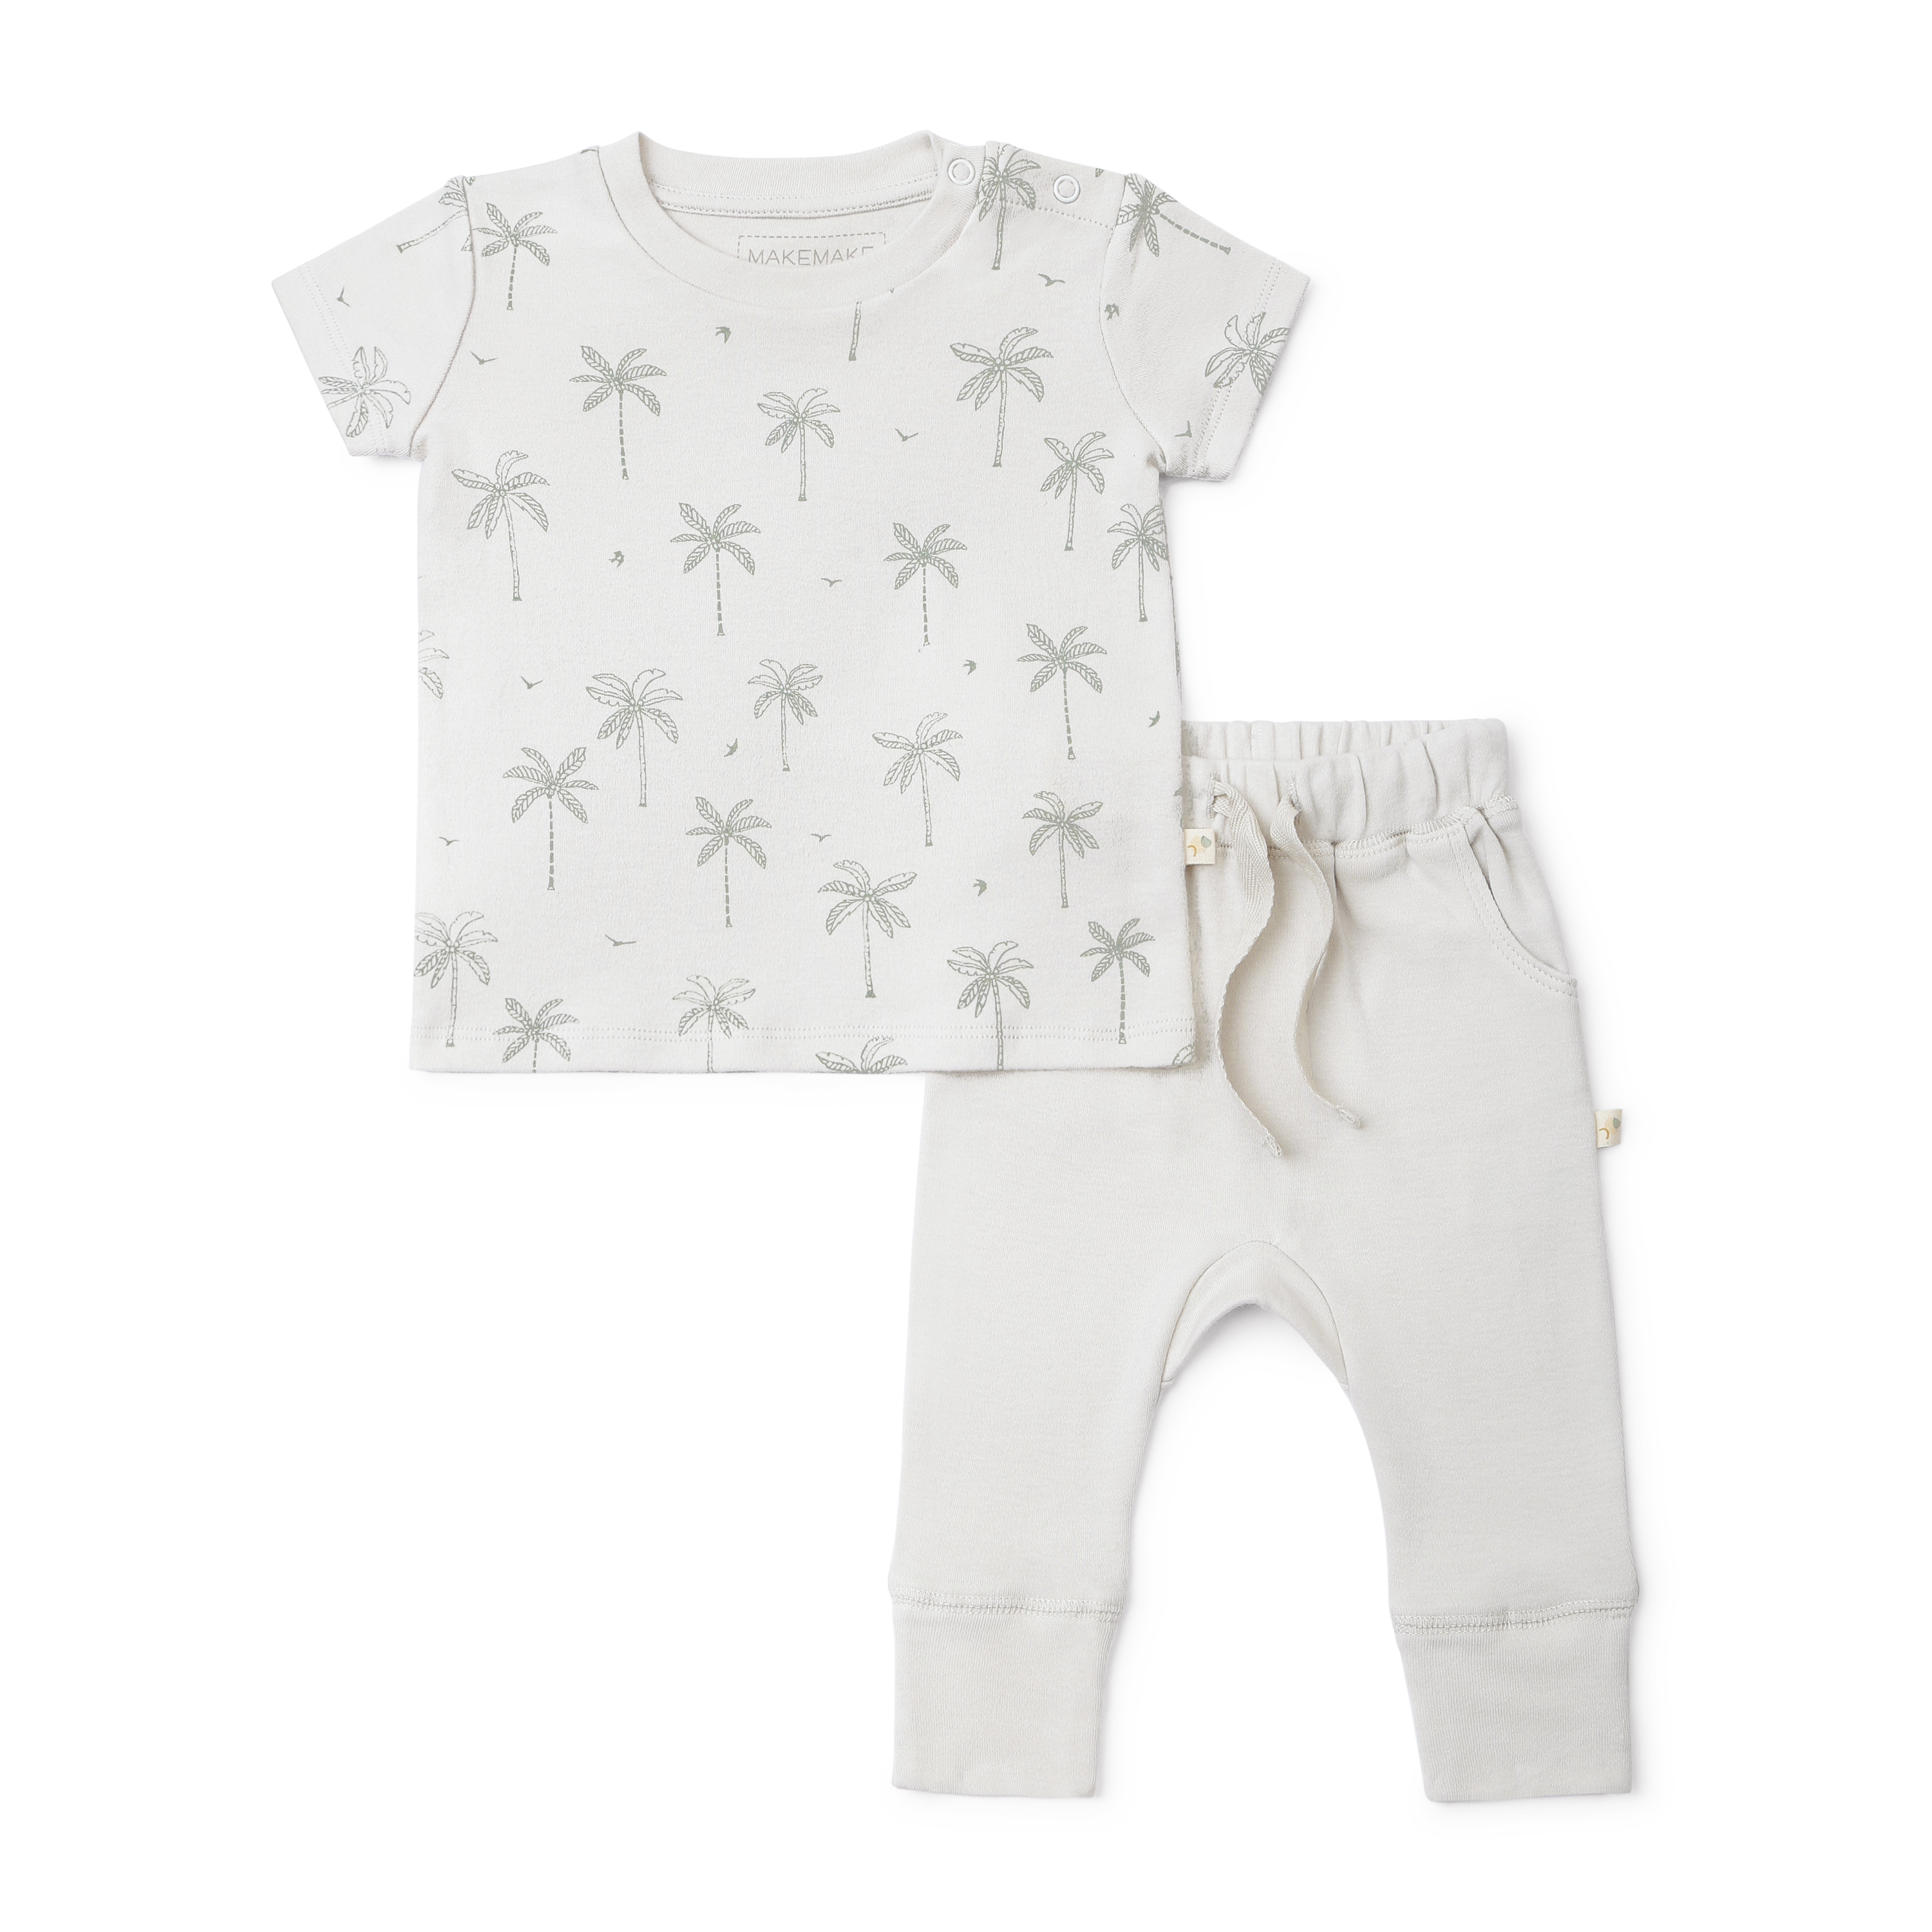 A toddler's outfit from Organic Kids consisting of a white short-sleeve t-shirt with a grey palm tree print and matching plain grey pants with a drawstring waist. The set is Organic Tee & Pants Set - Tropical.